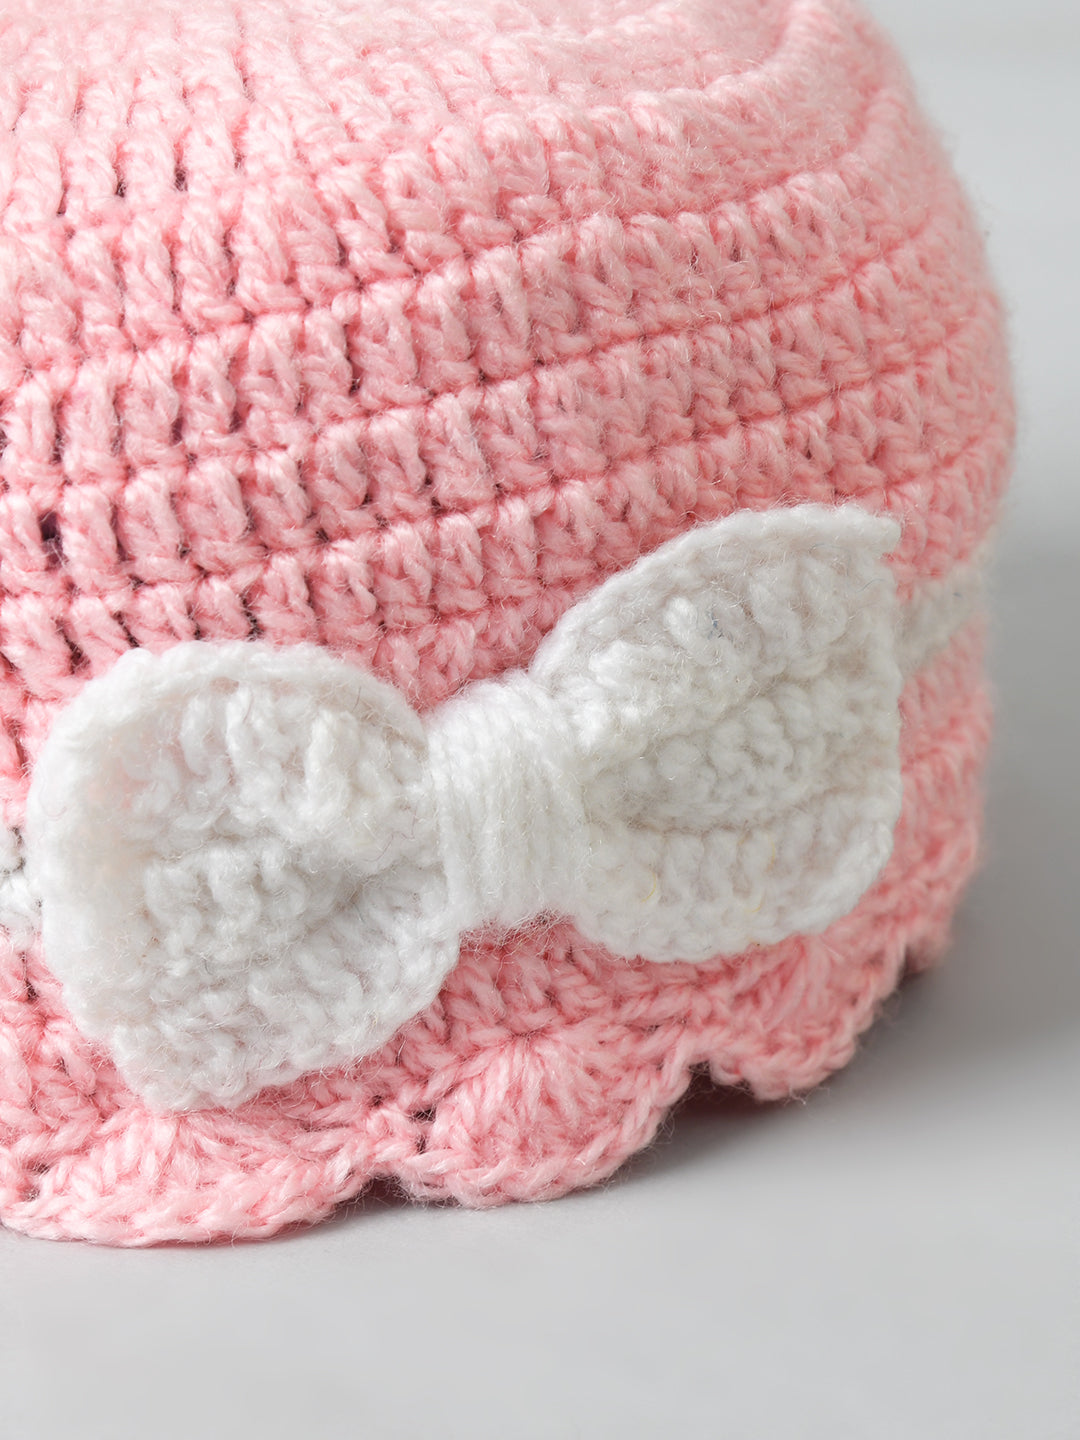 Pink & White Handmade Woollen Cap with Bow for Girls